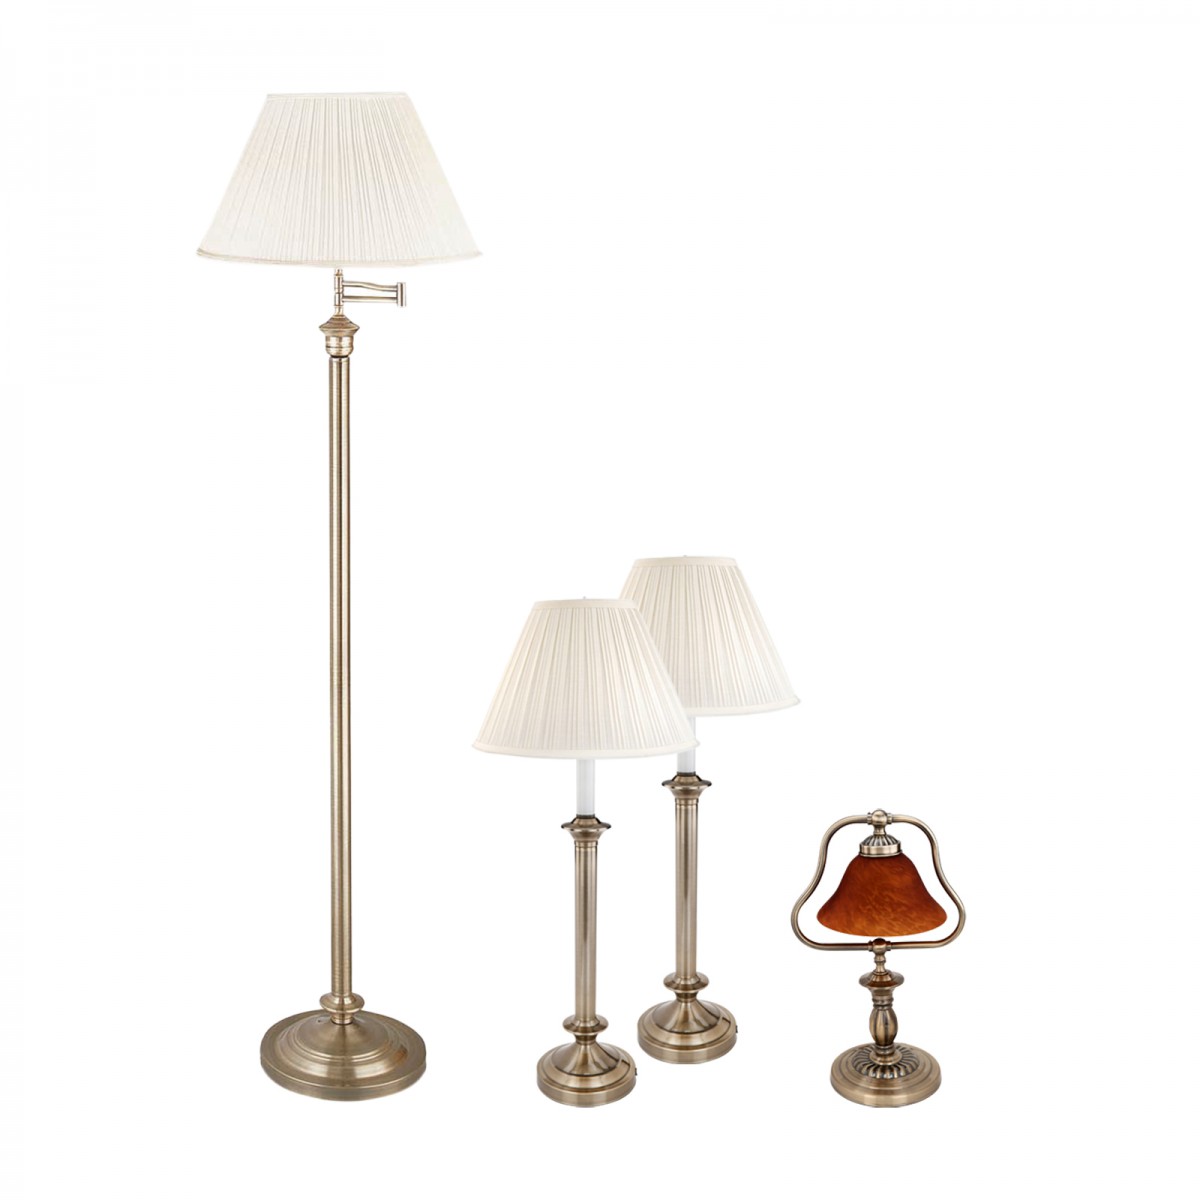 Renovators Supply Table Lamp Antique, Matching Brass Floor And Table Lamps